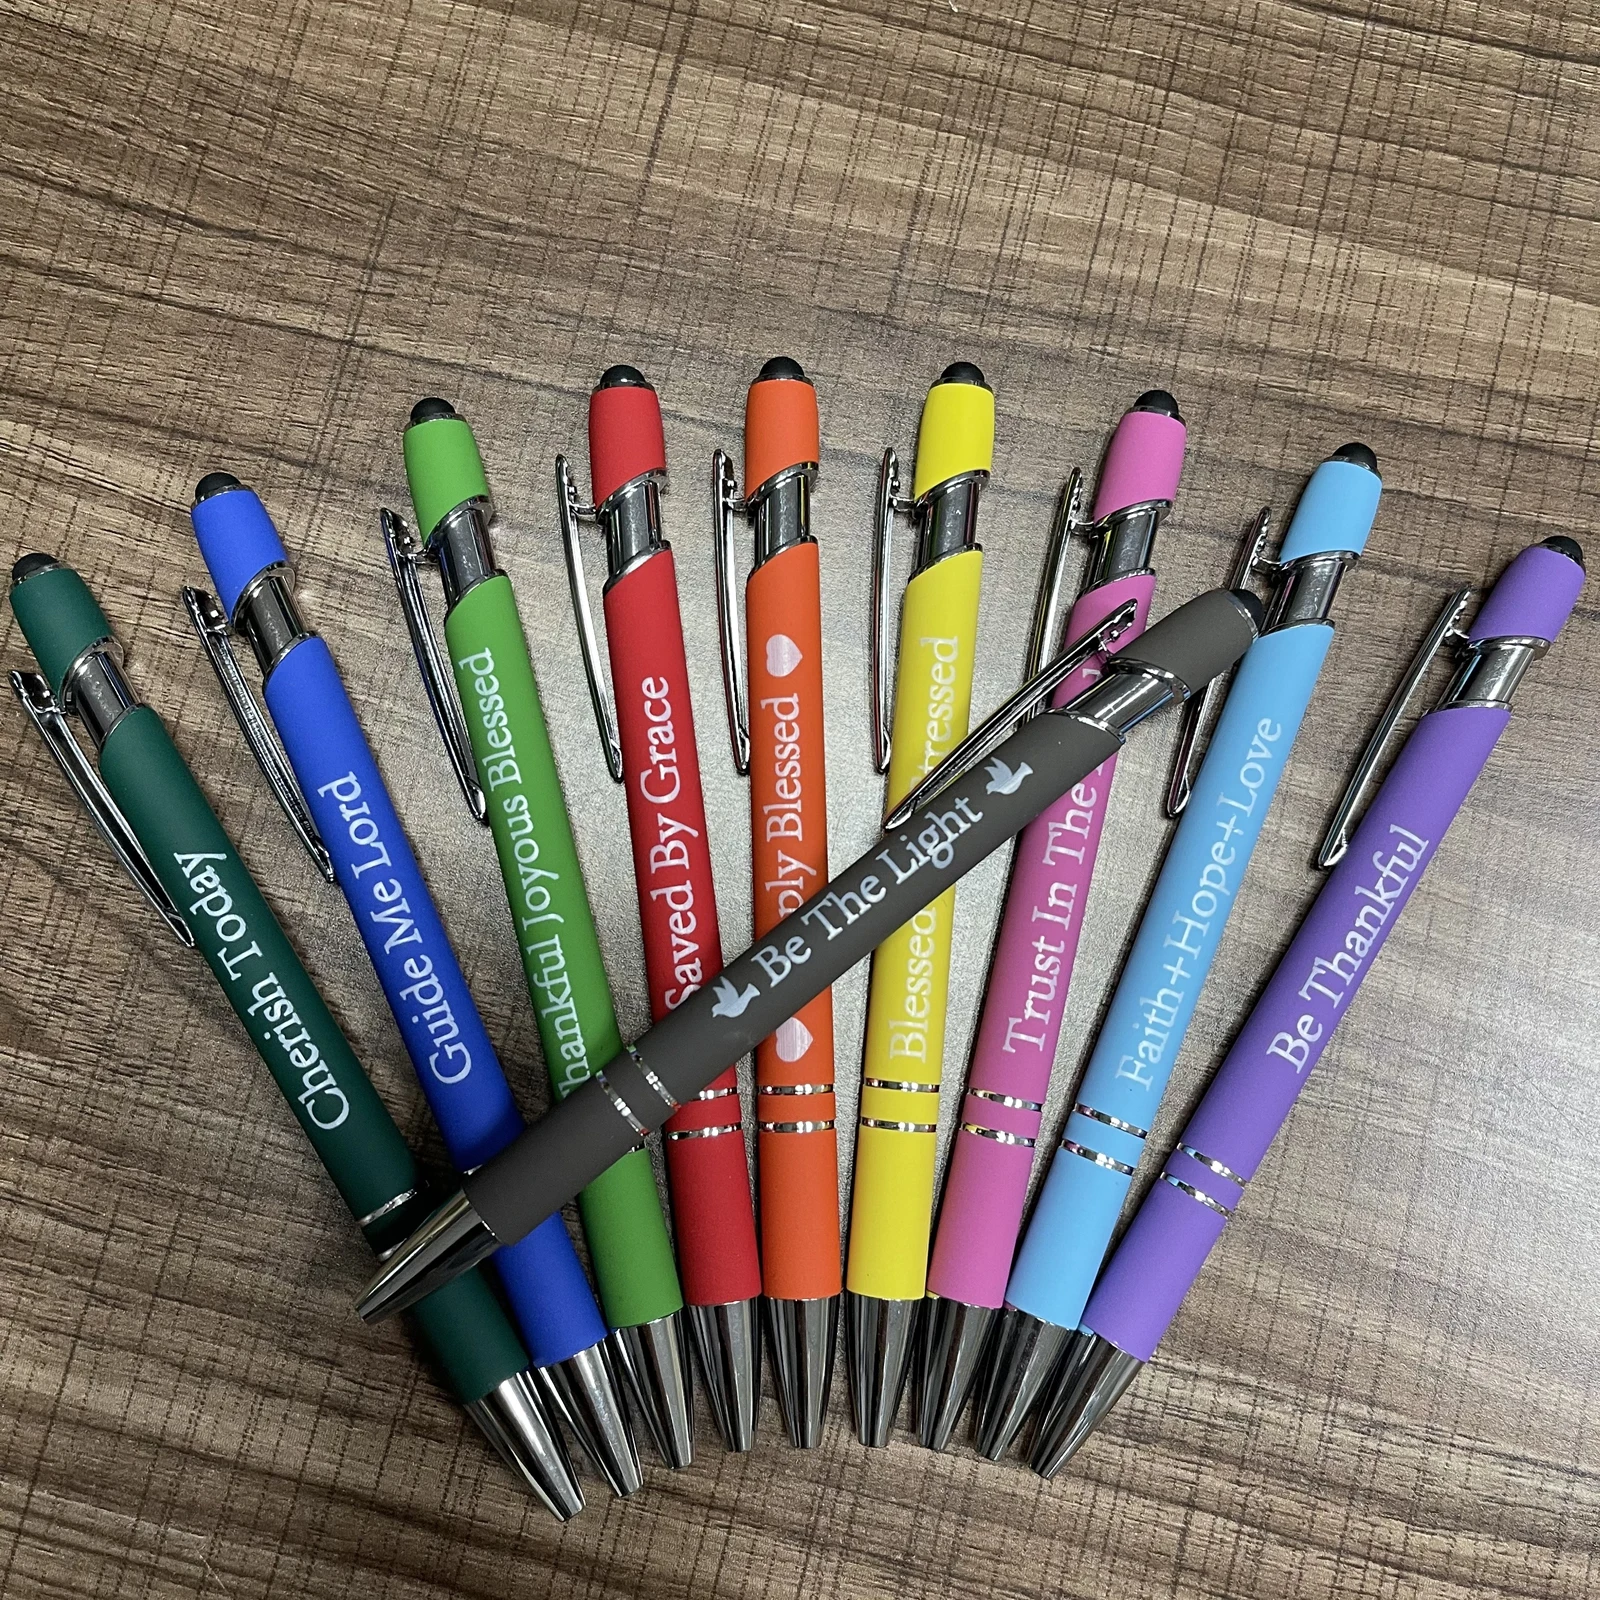 10pcs funny pens touch screen function